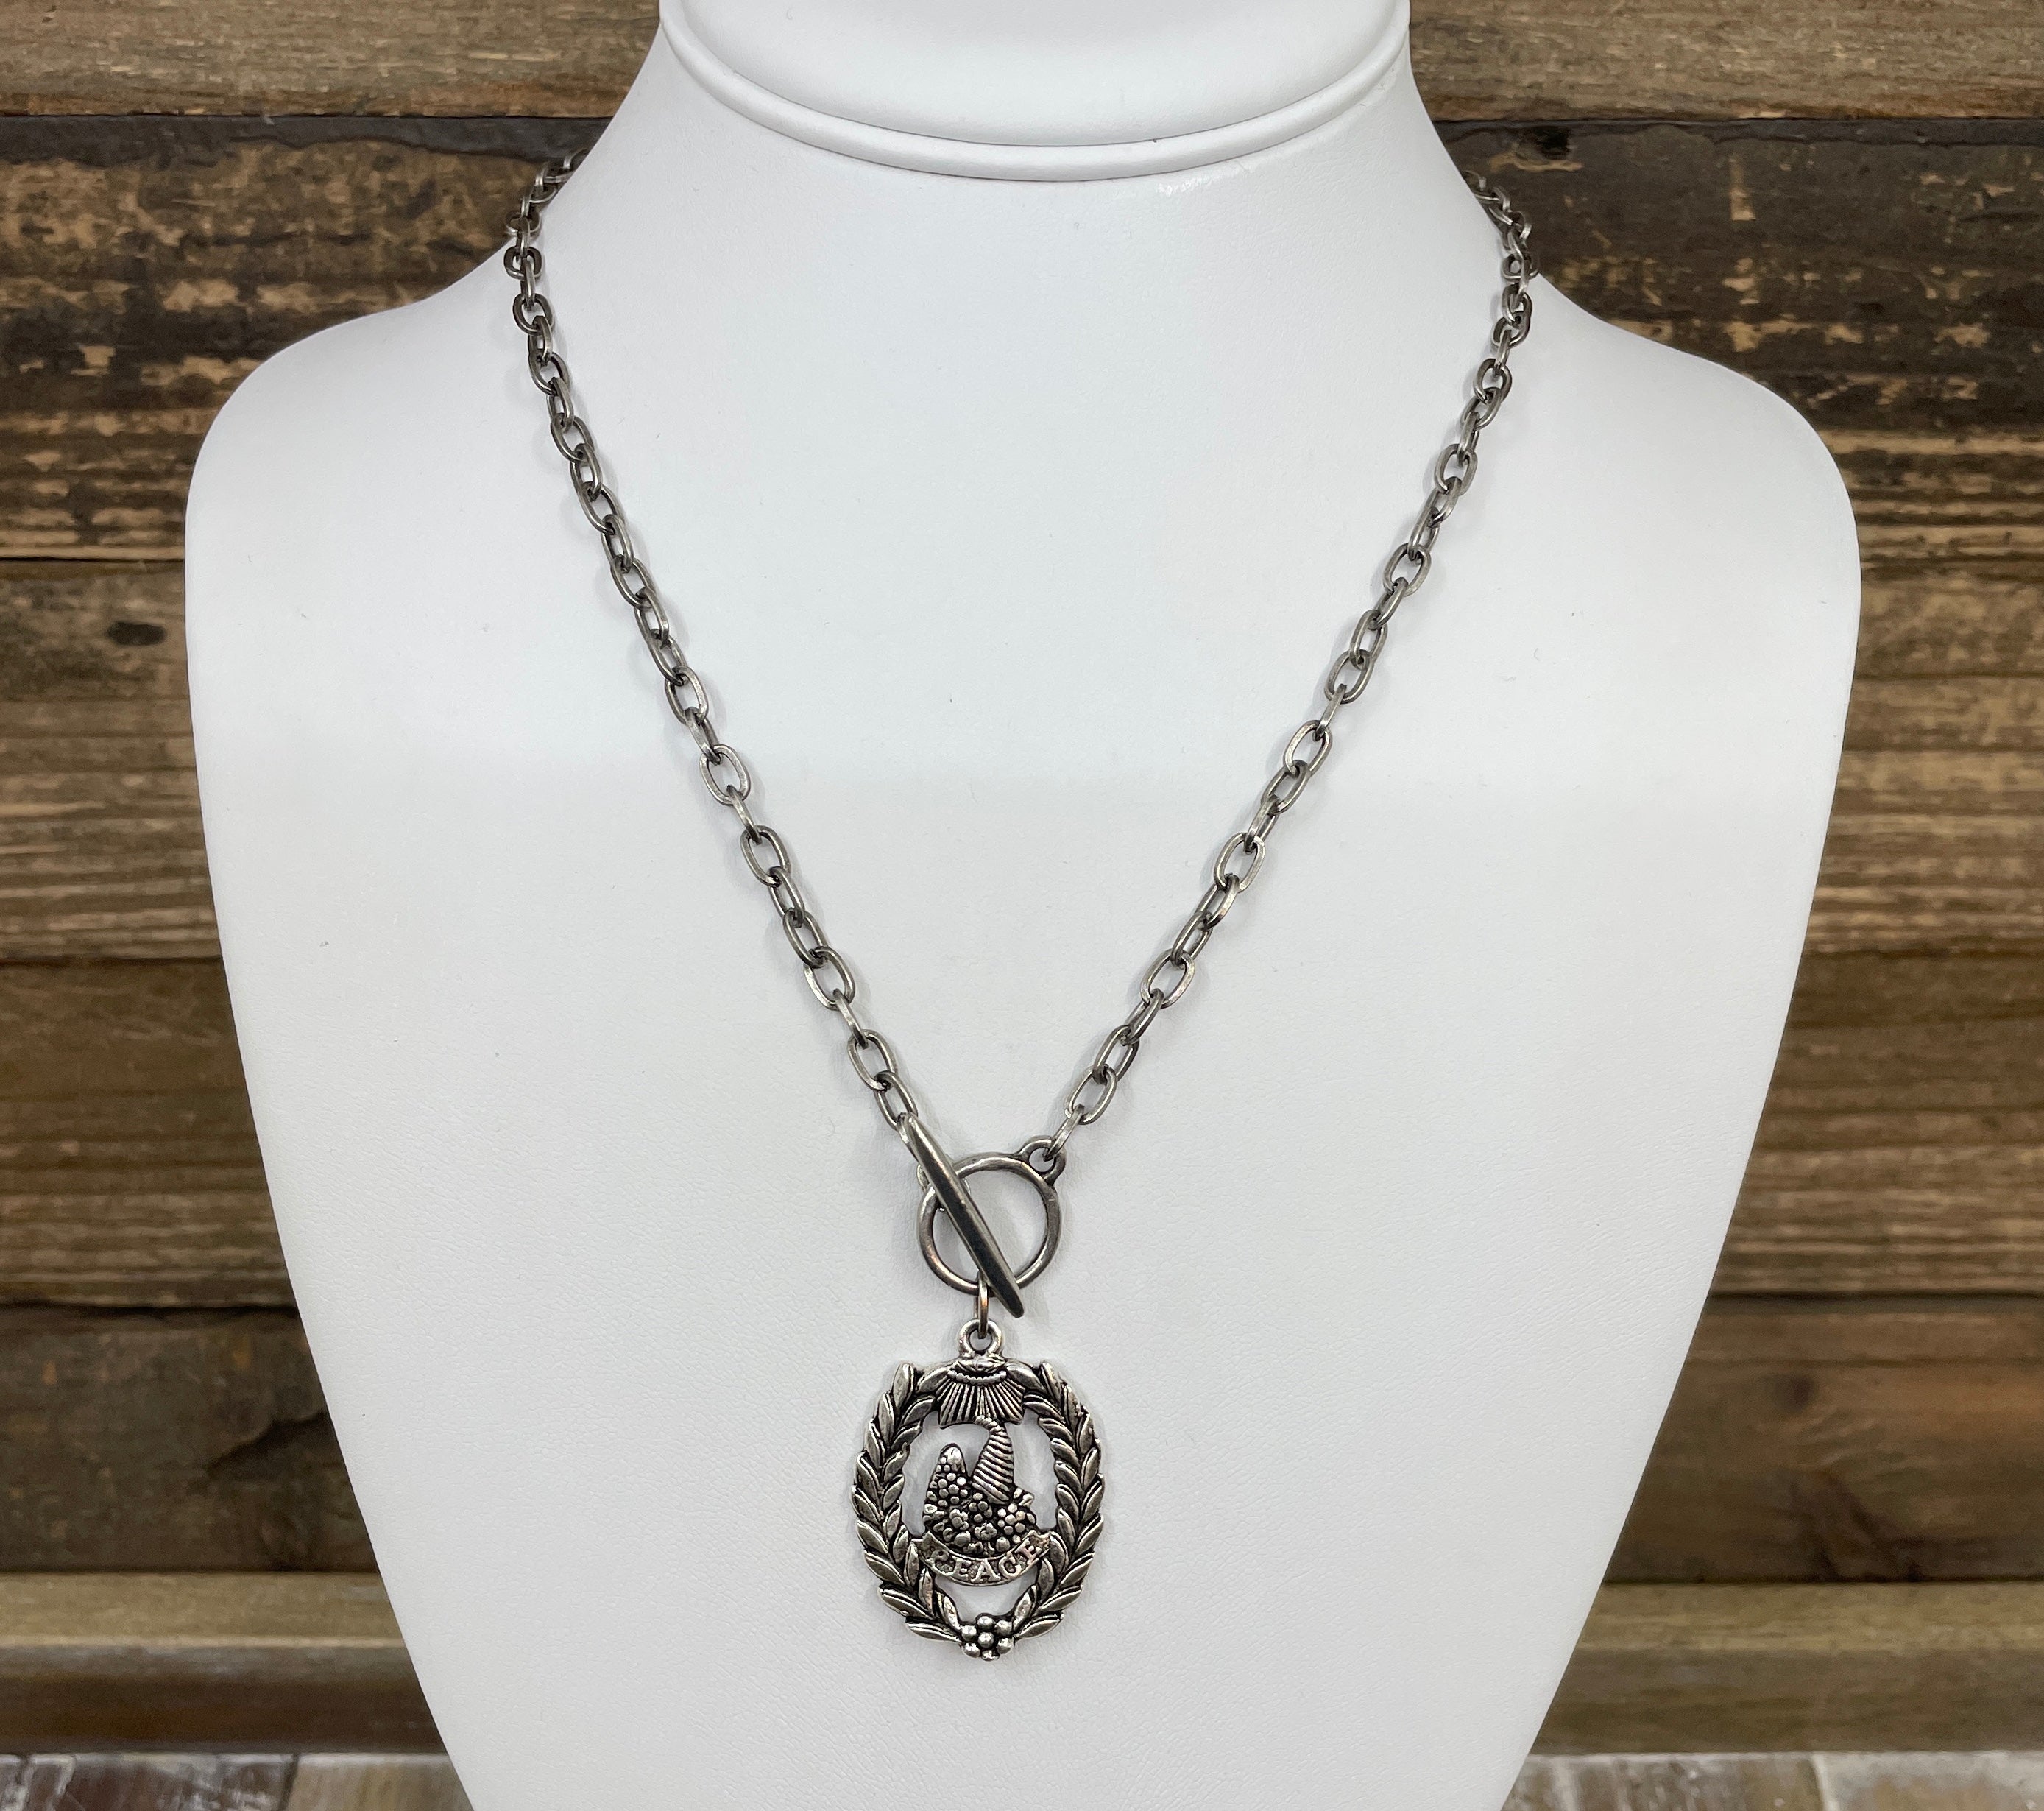 Silver Plated 18" Chain with Silver Plated Peace Cornucopia